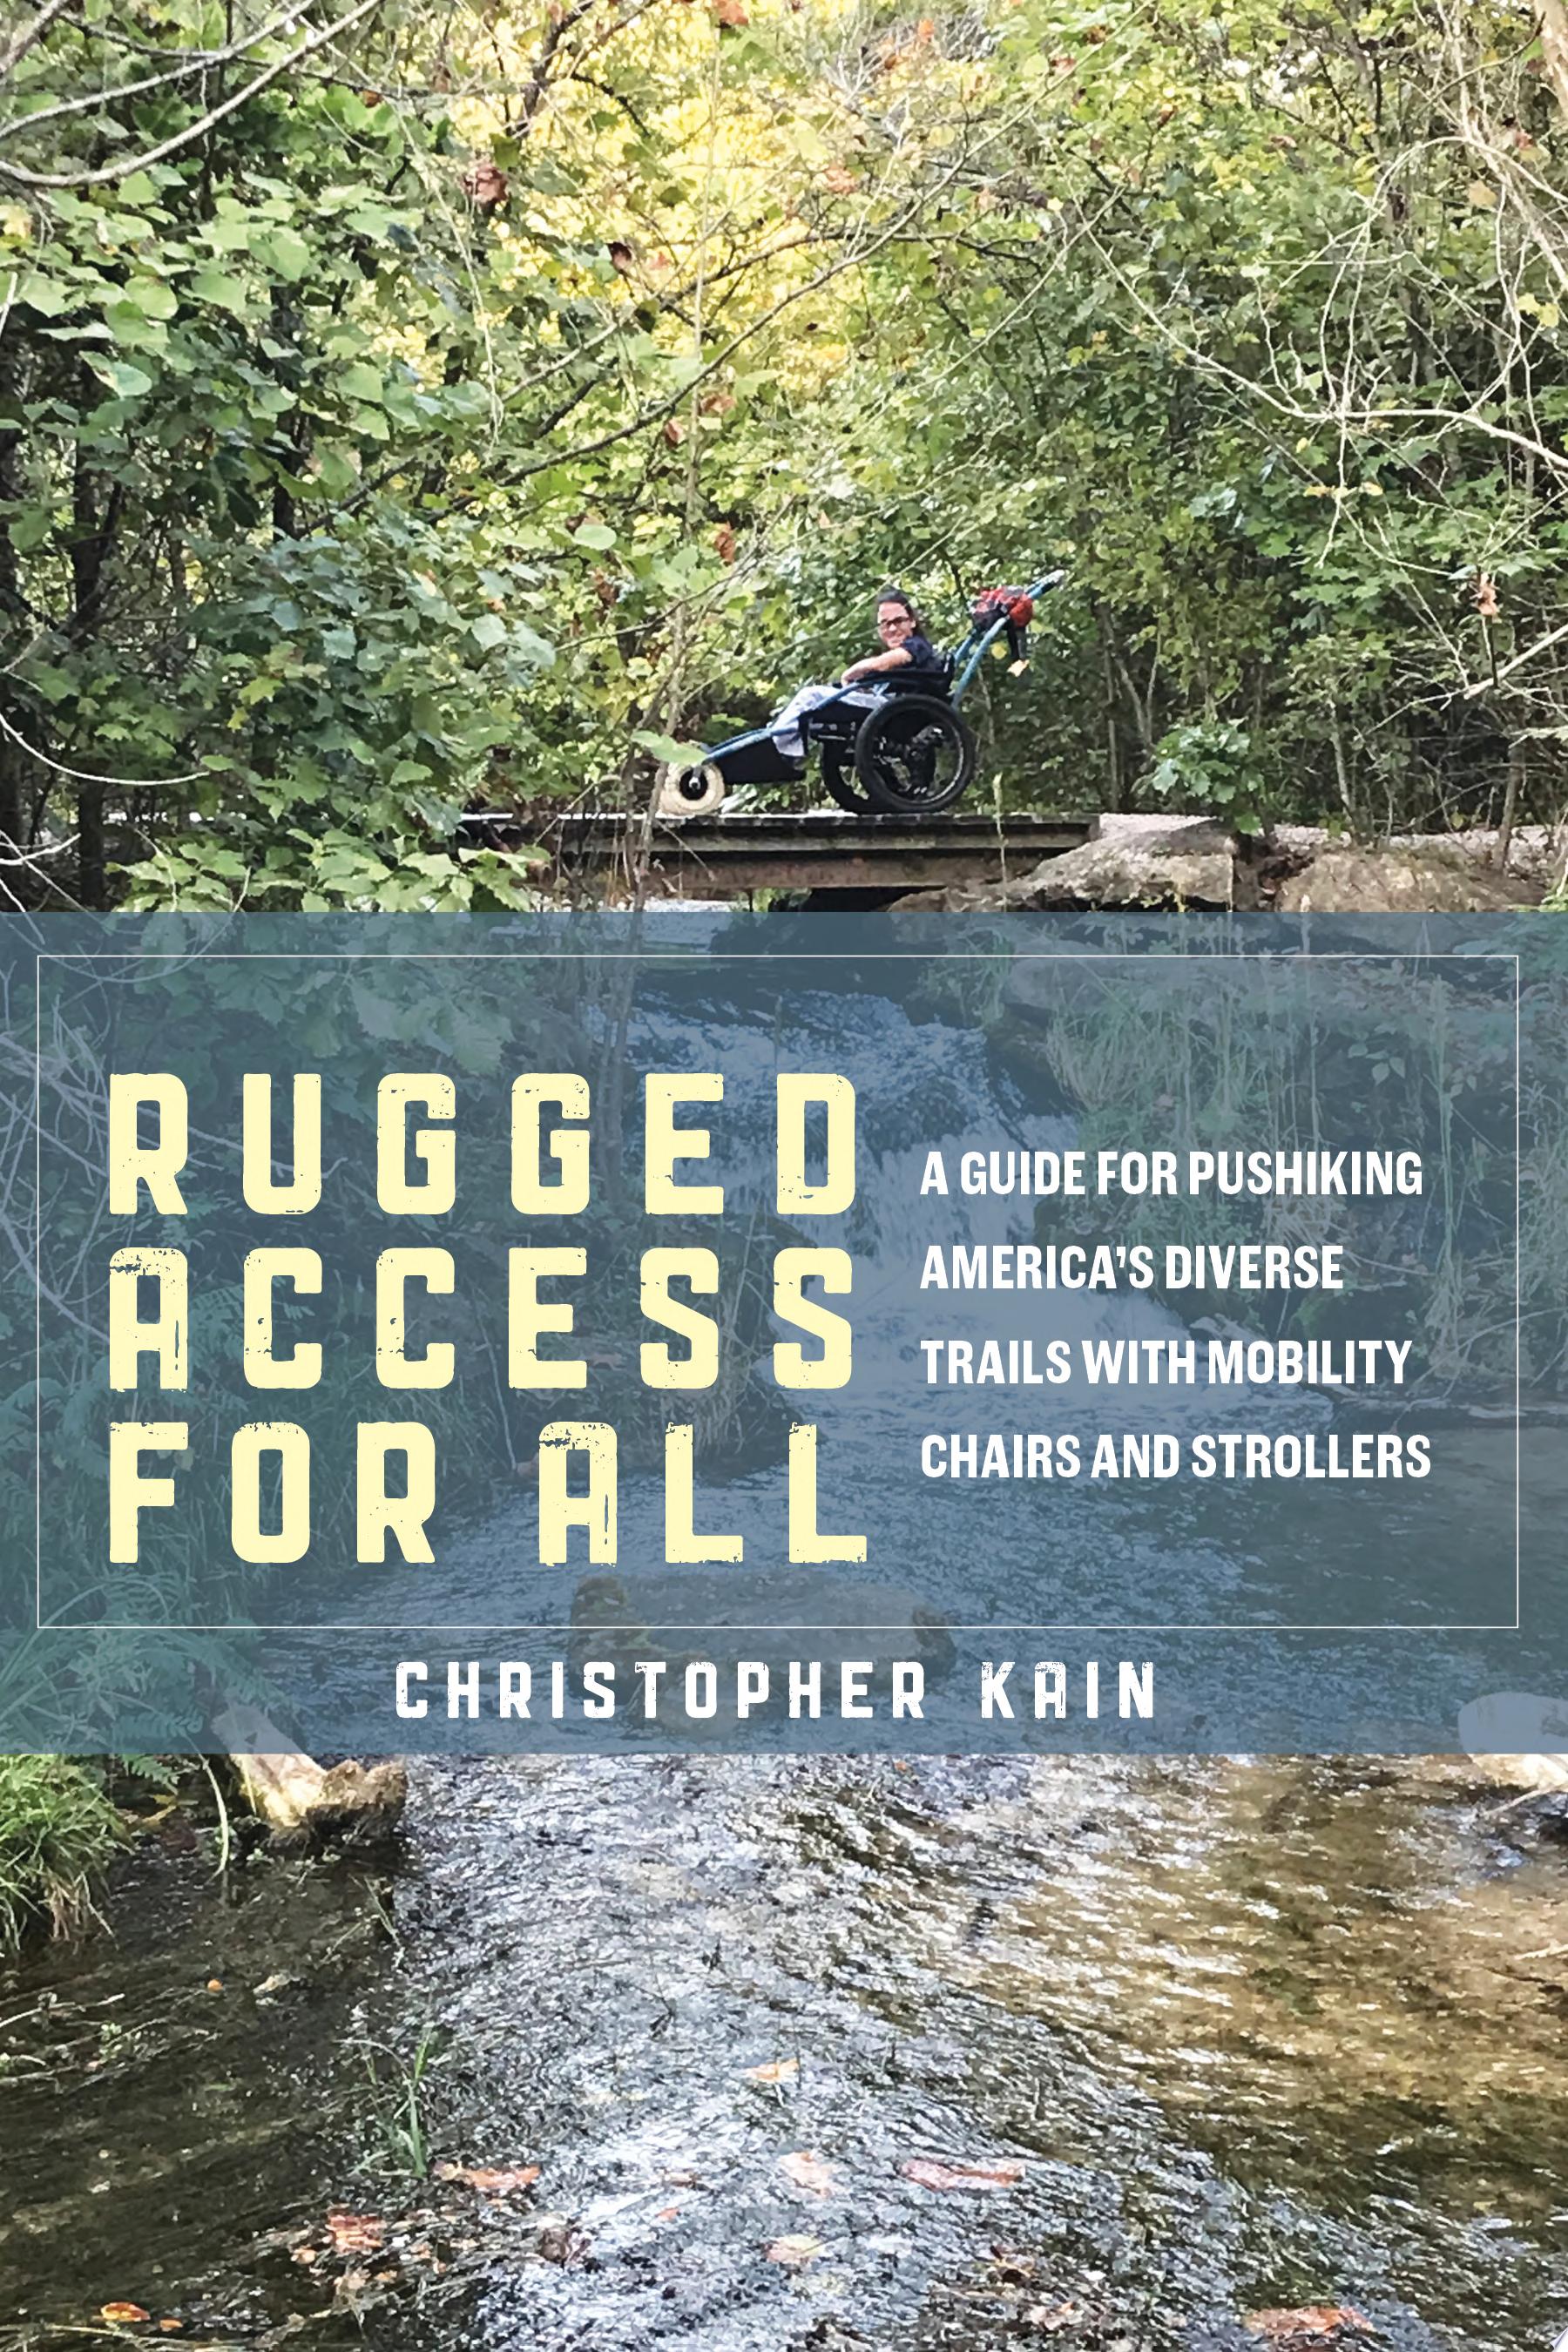 Image for "Rugged Access for All"